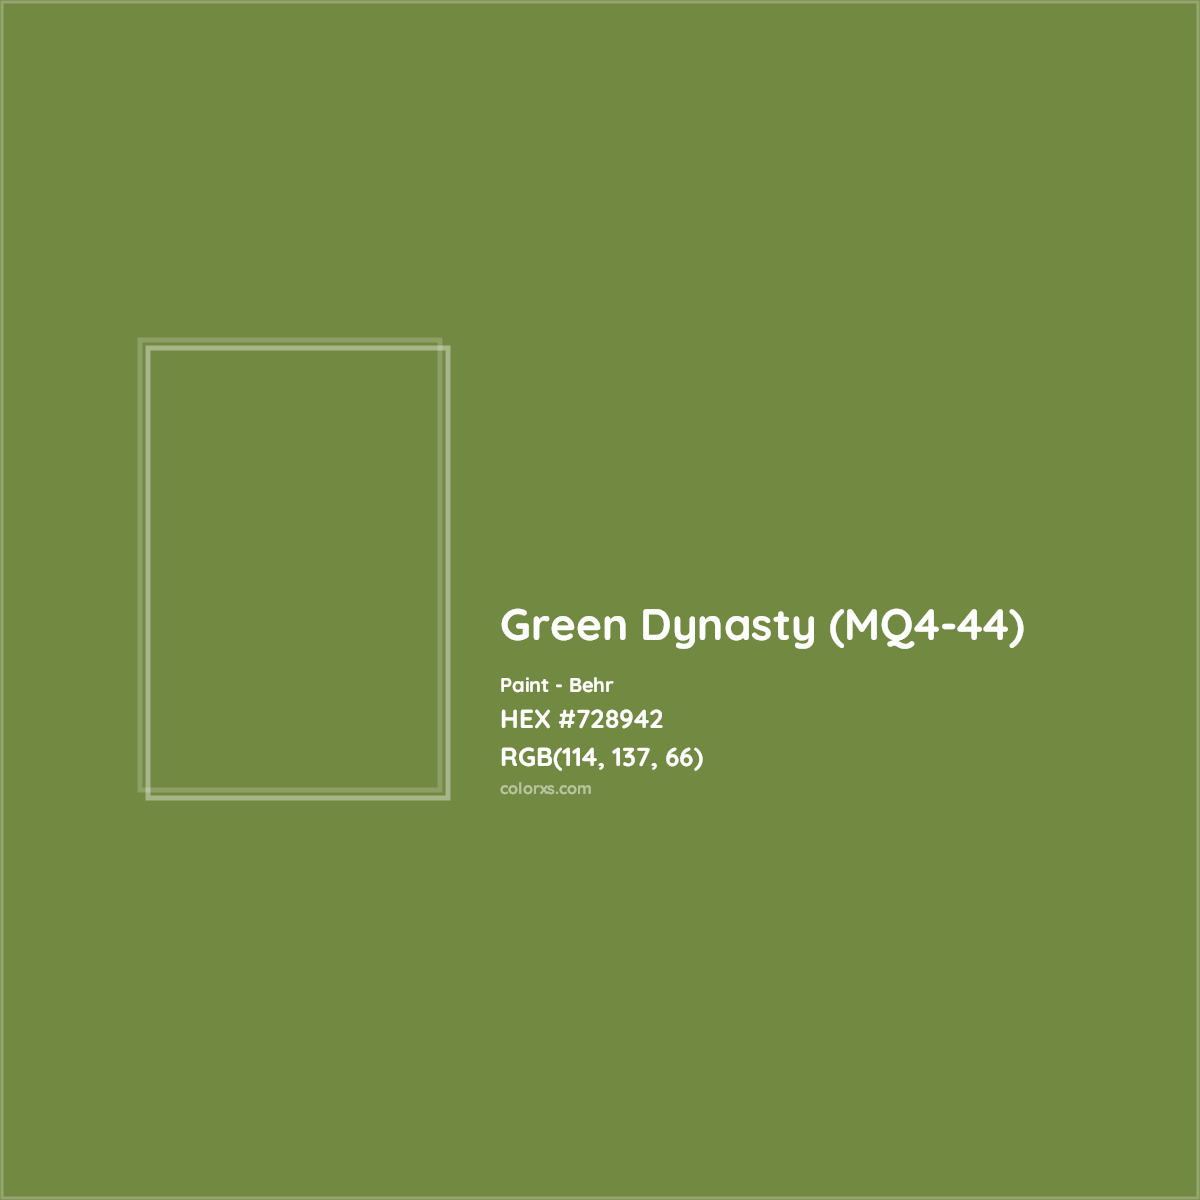 HEX #728942 Green Dynasty (MQ4-44) Paint Behr - Color Code